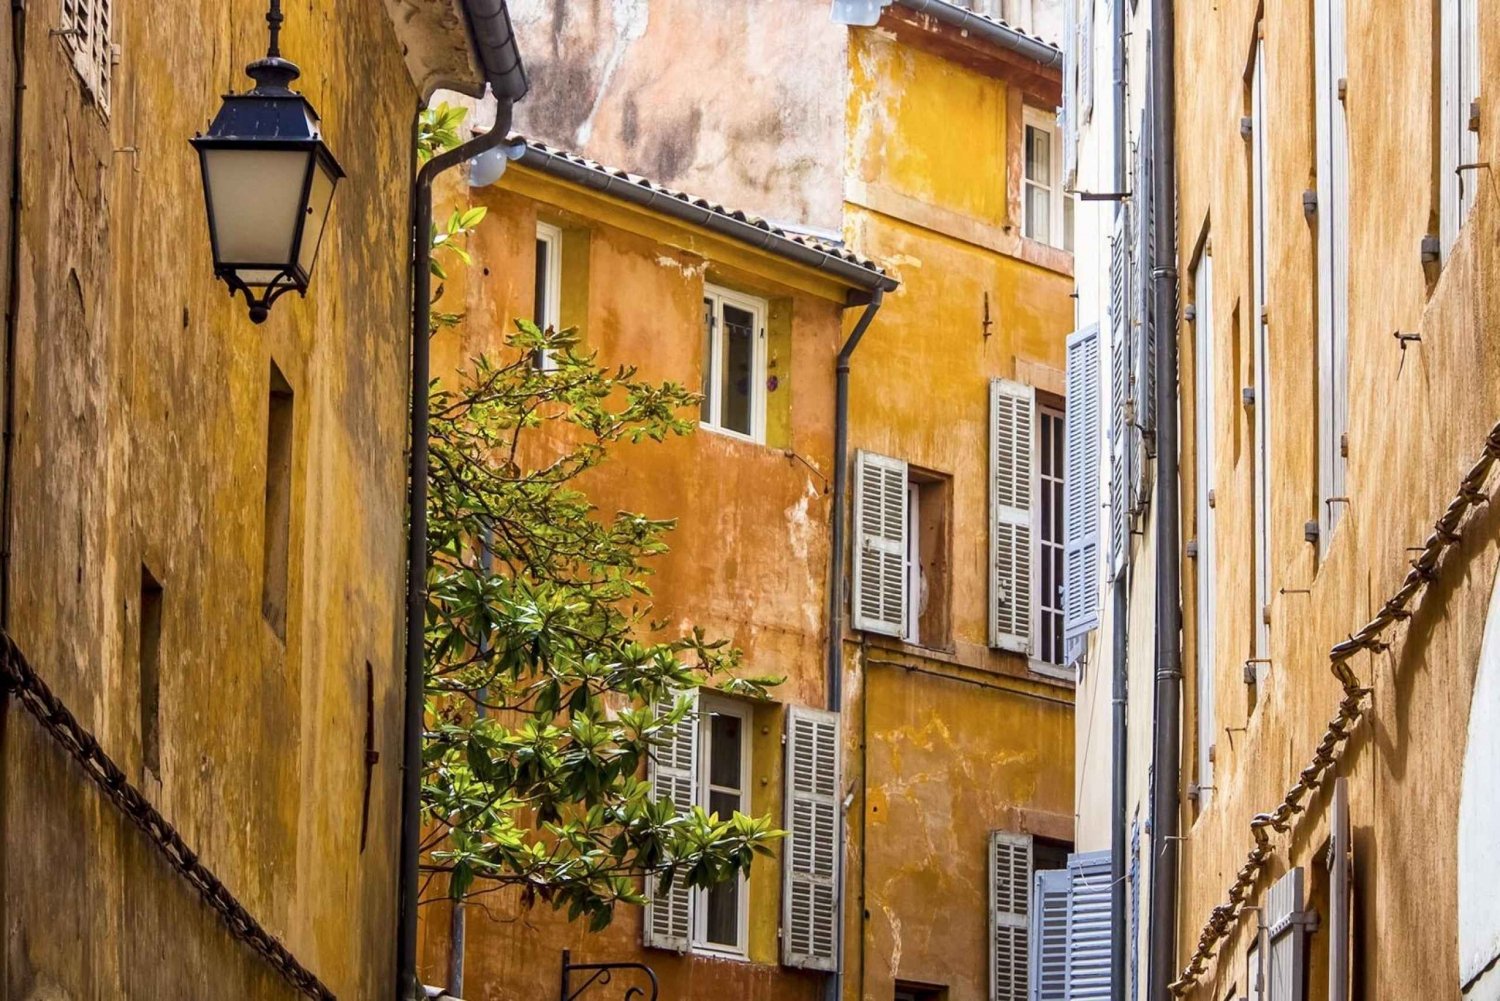 Aix en Provence: Visit & Wine Tasting Full day Private Tour